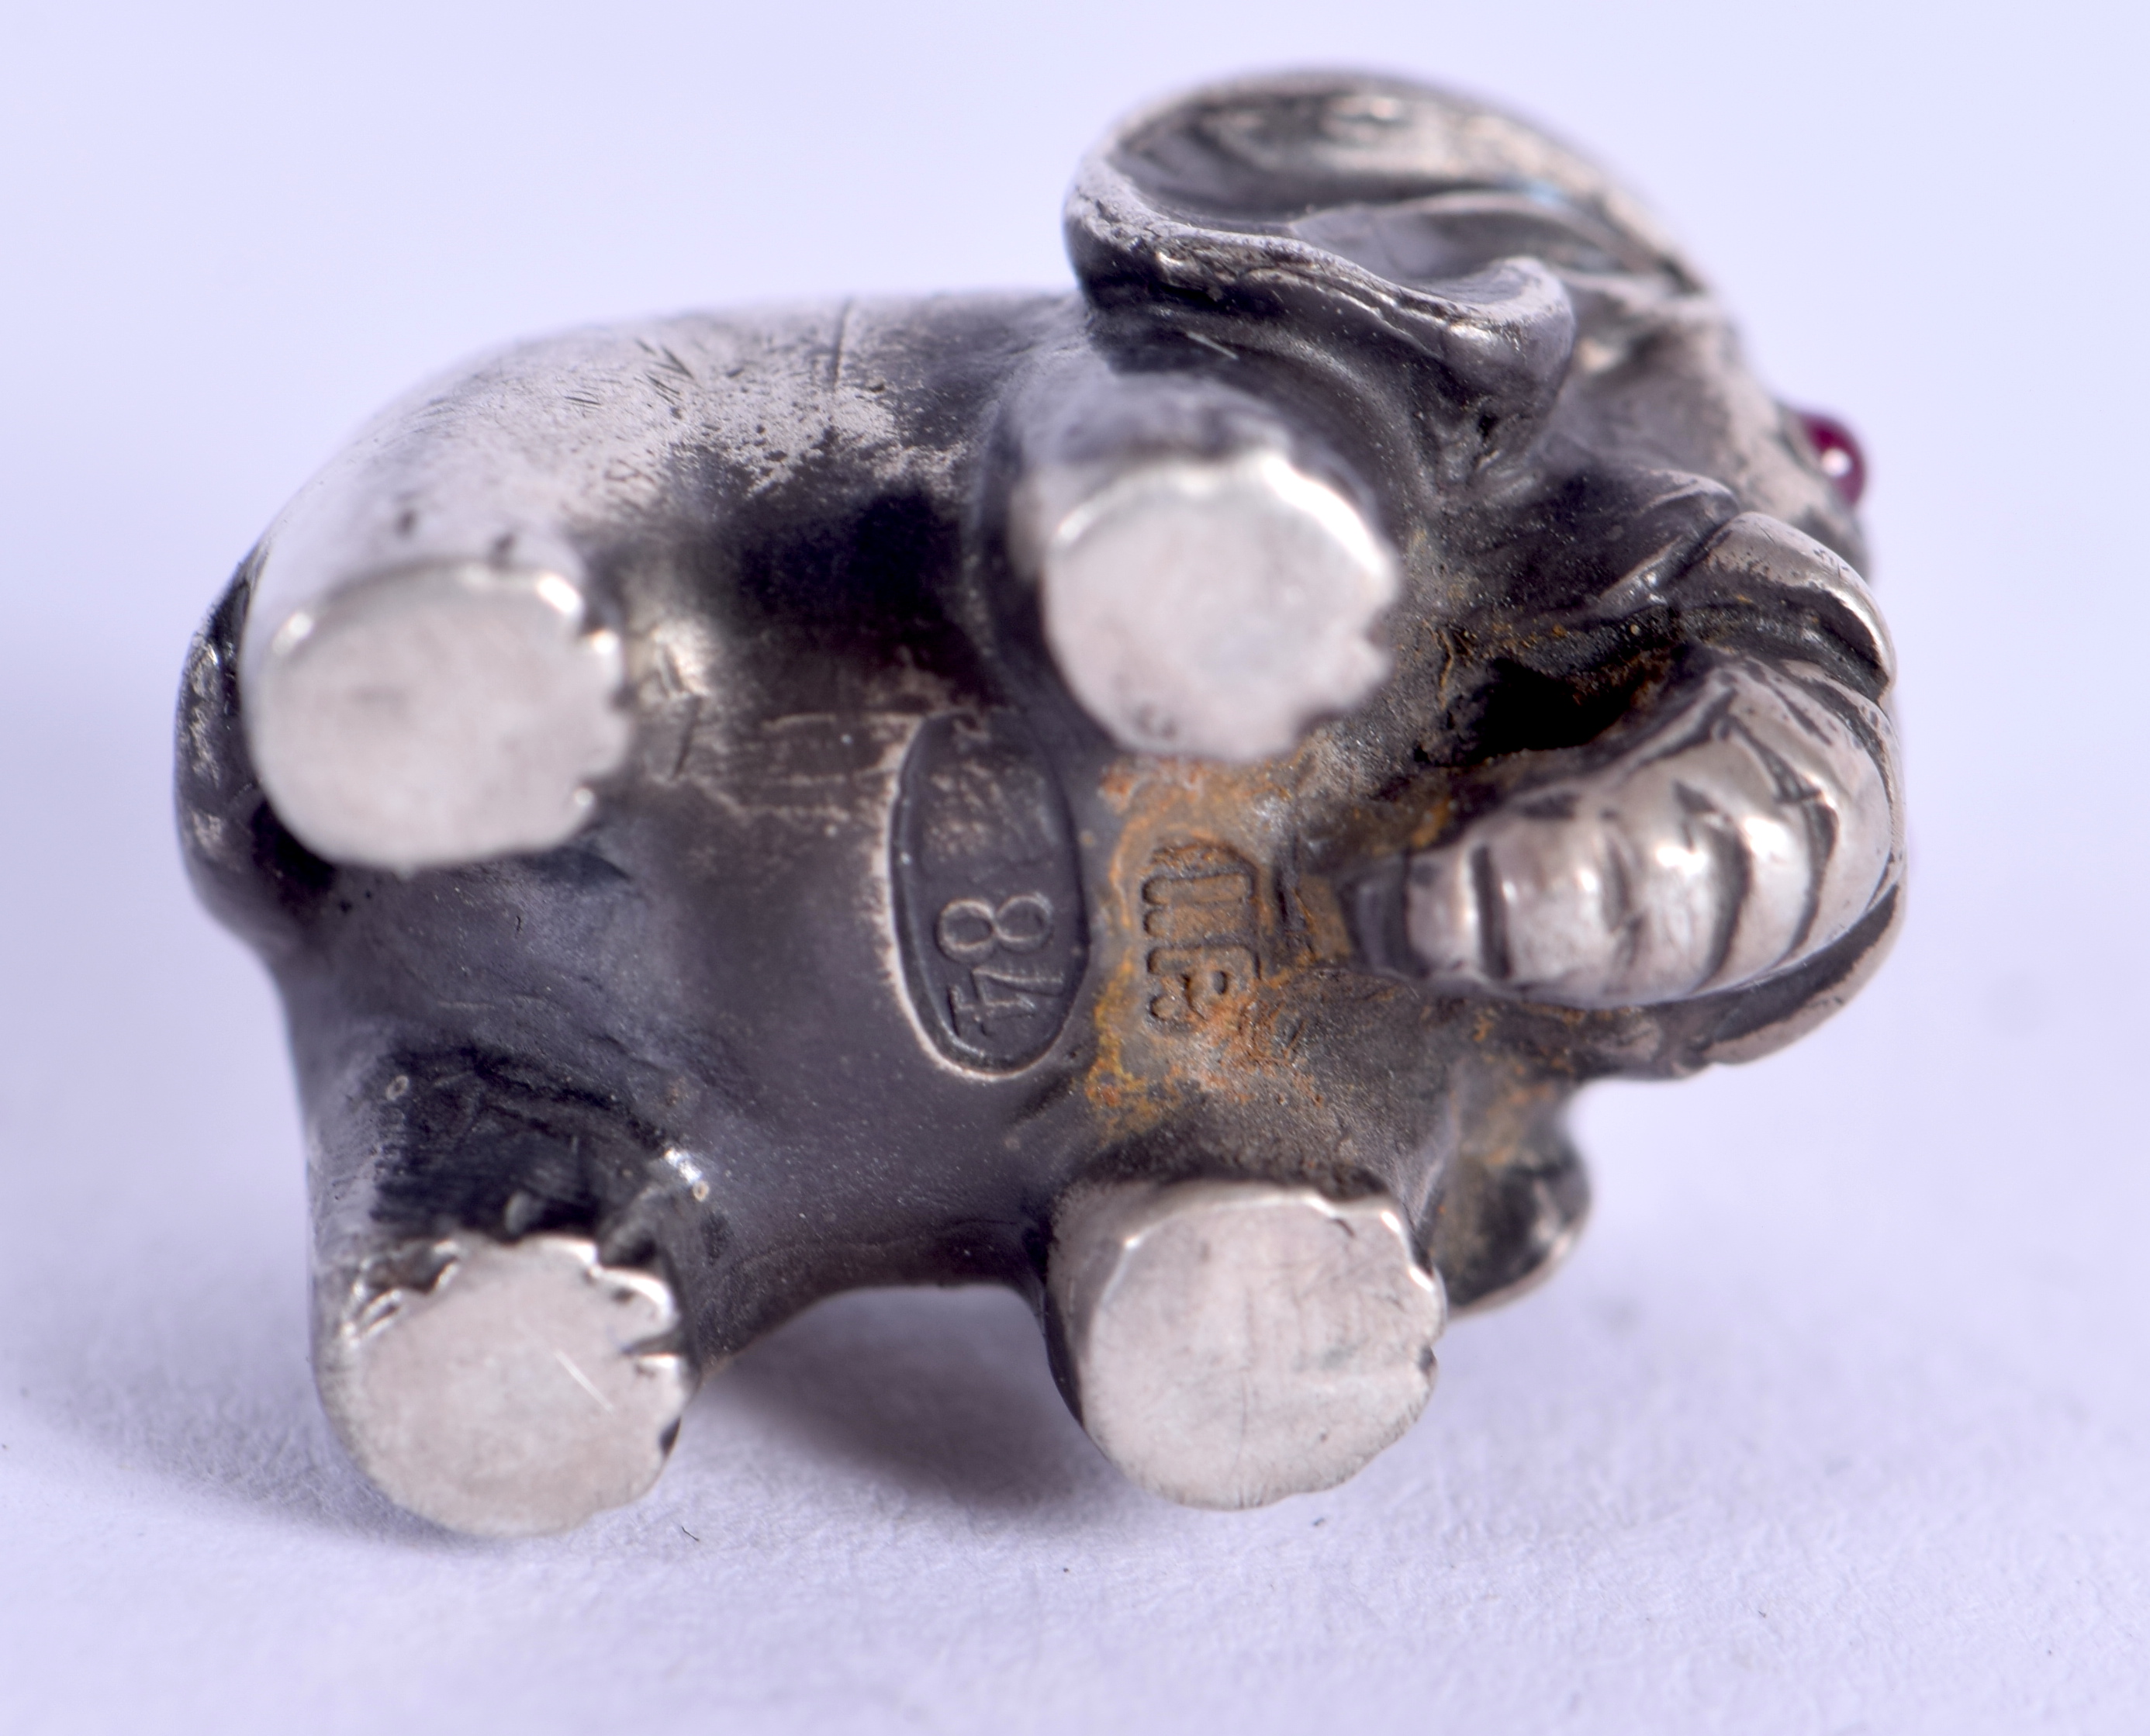 A SMALL CONTINENTAL FIGURE OF AN ELEPHANT. 16 grams. 1.5 cm wide. - Image 3 of 3